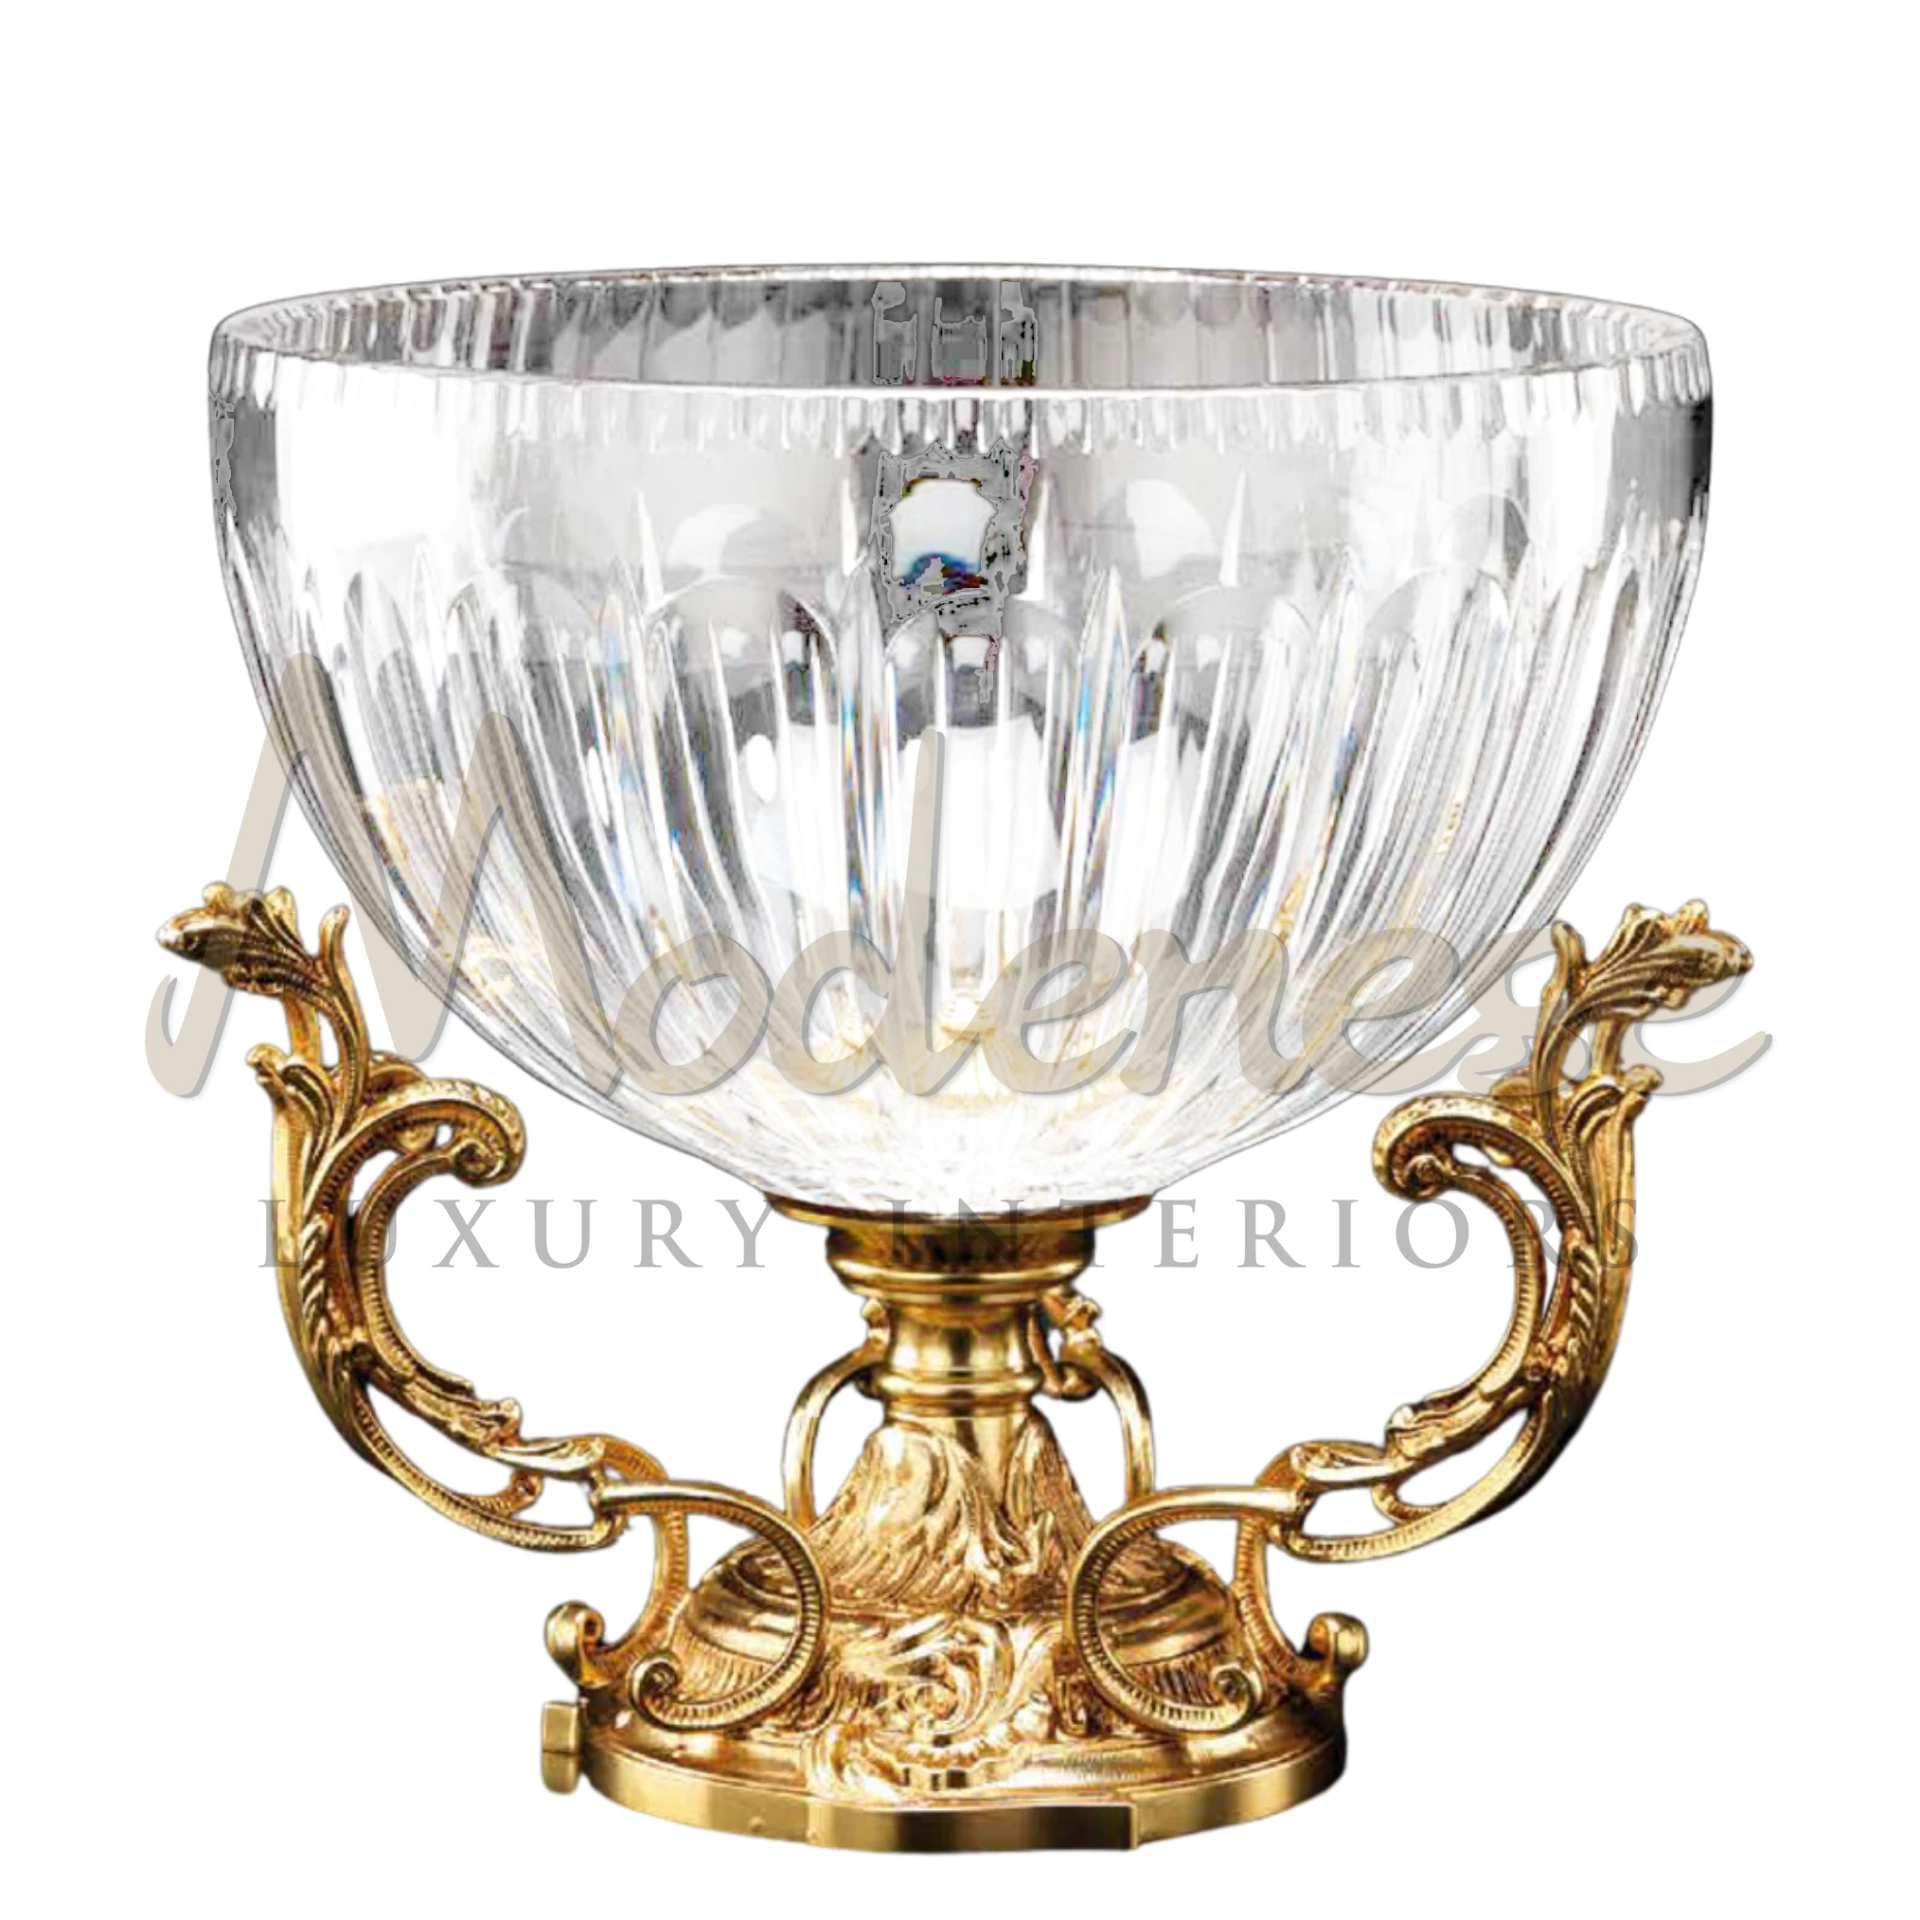 Gorgeous Crystal Bowl, a luxury glass vase with intricate floral and geometric patterns, perfect for baroque and classic styled luxury interiors.